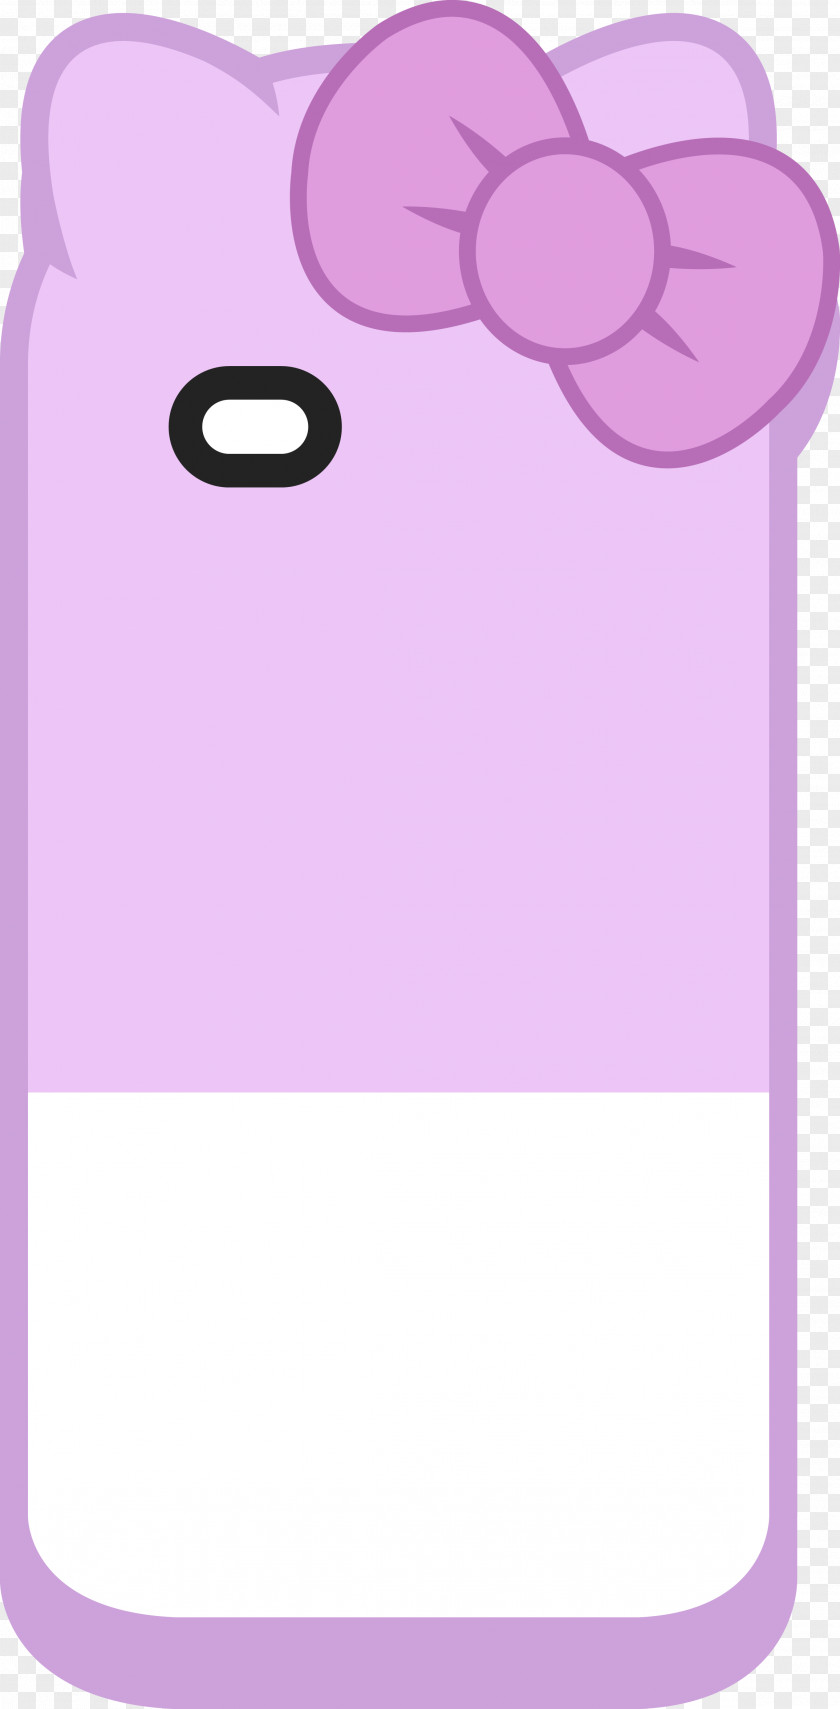 Hello Kitty Mobile Phone Sets Vector PNG